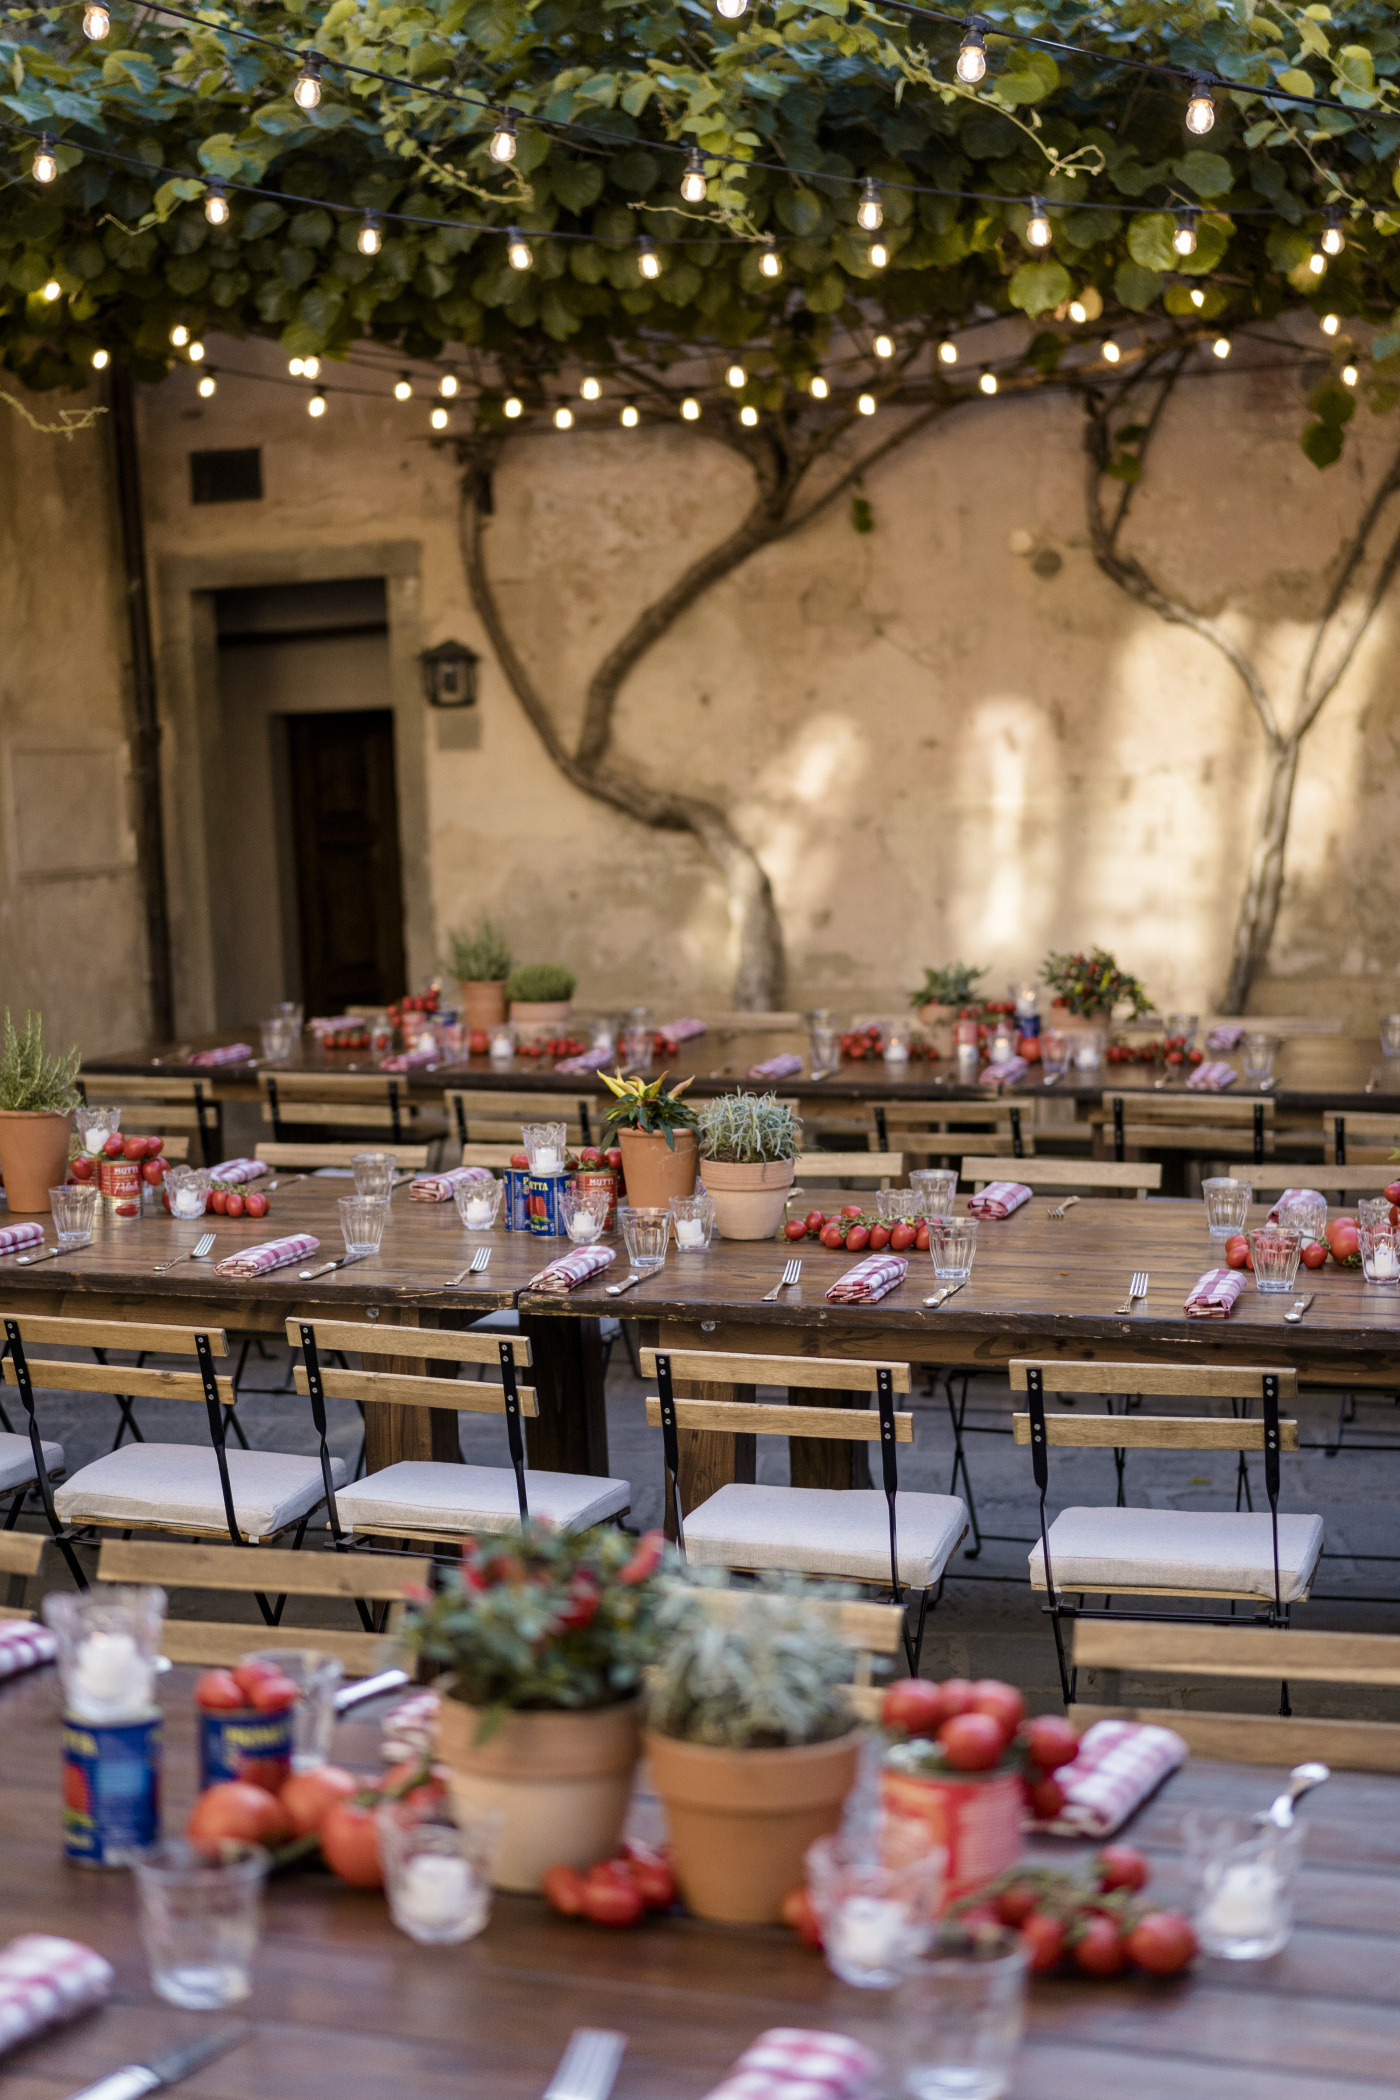 Rustic chic decor for a welcome dinner 50th birthday party